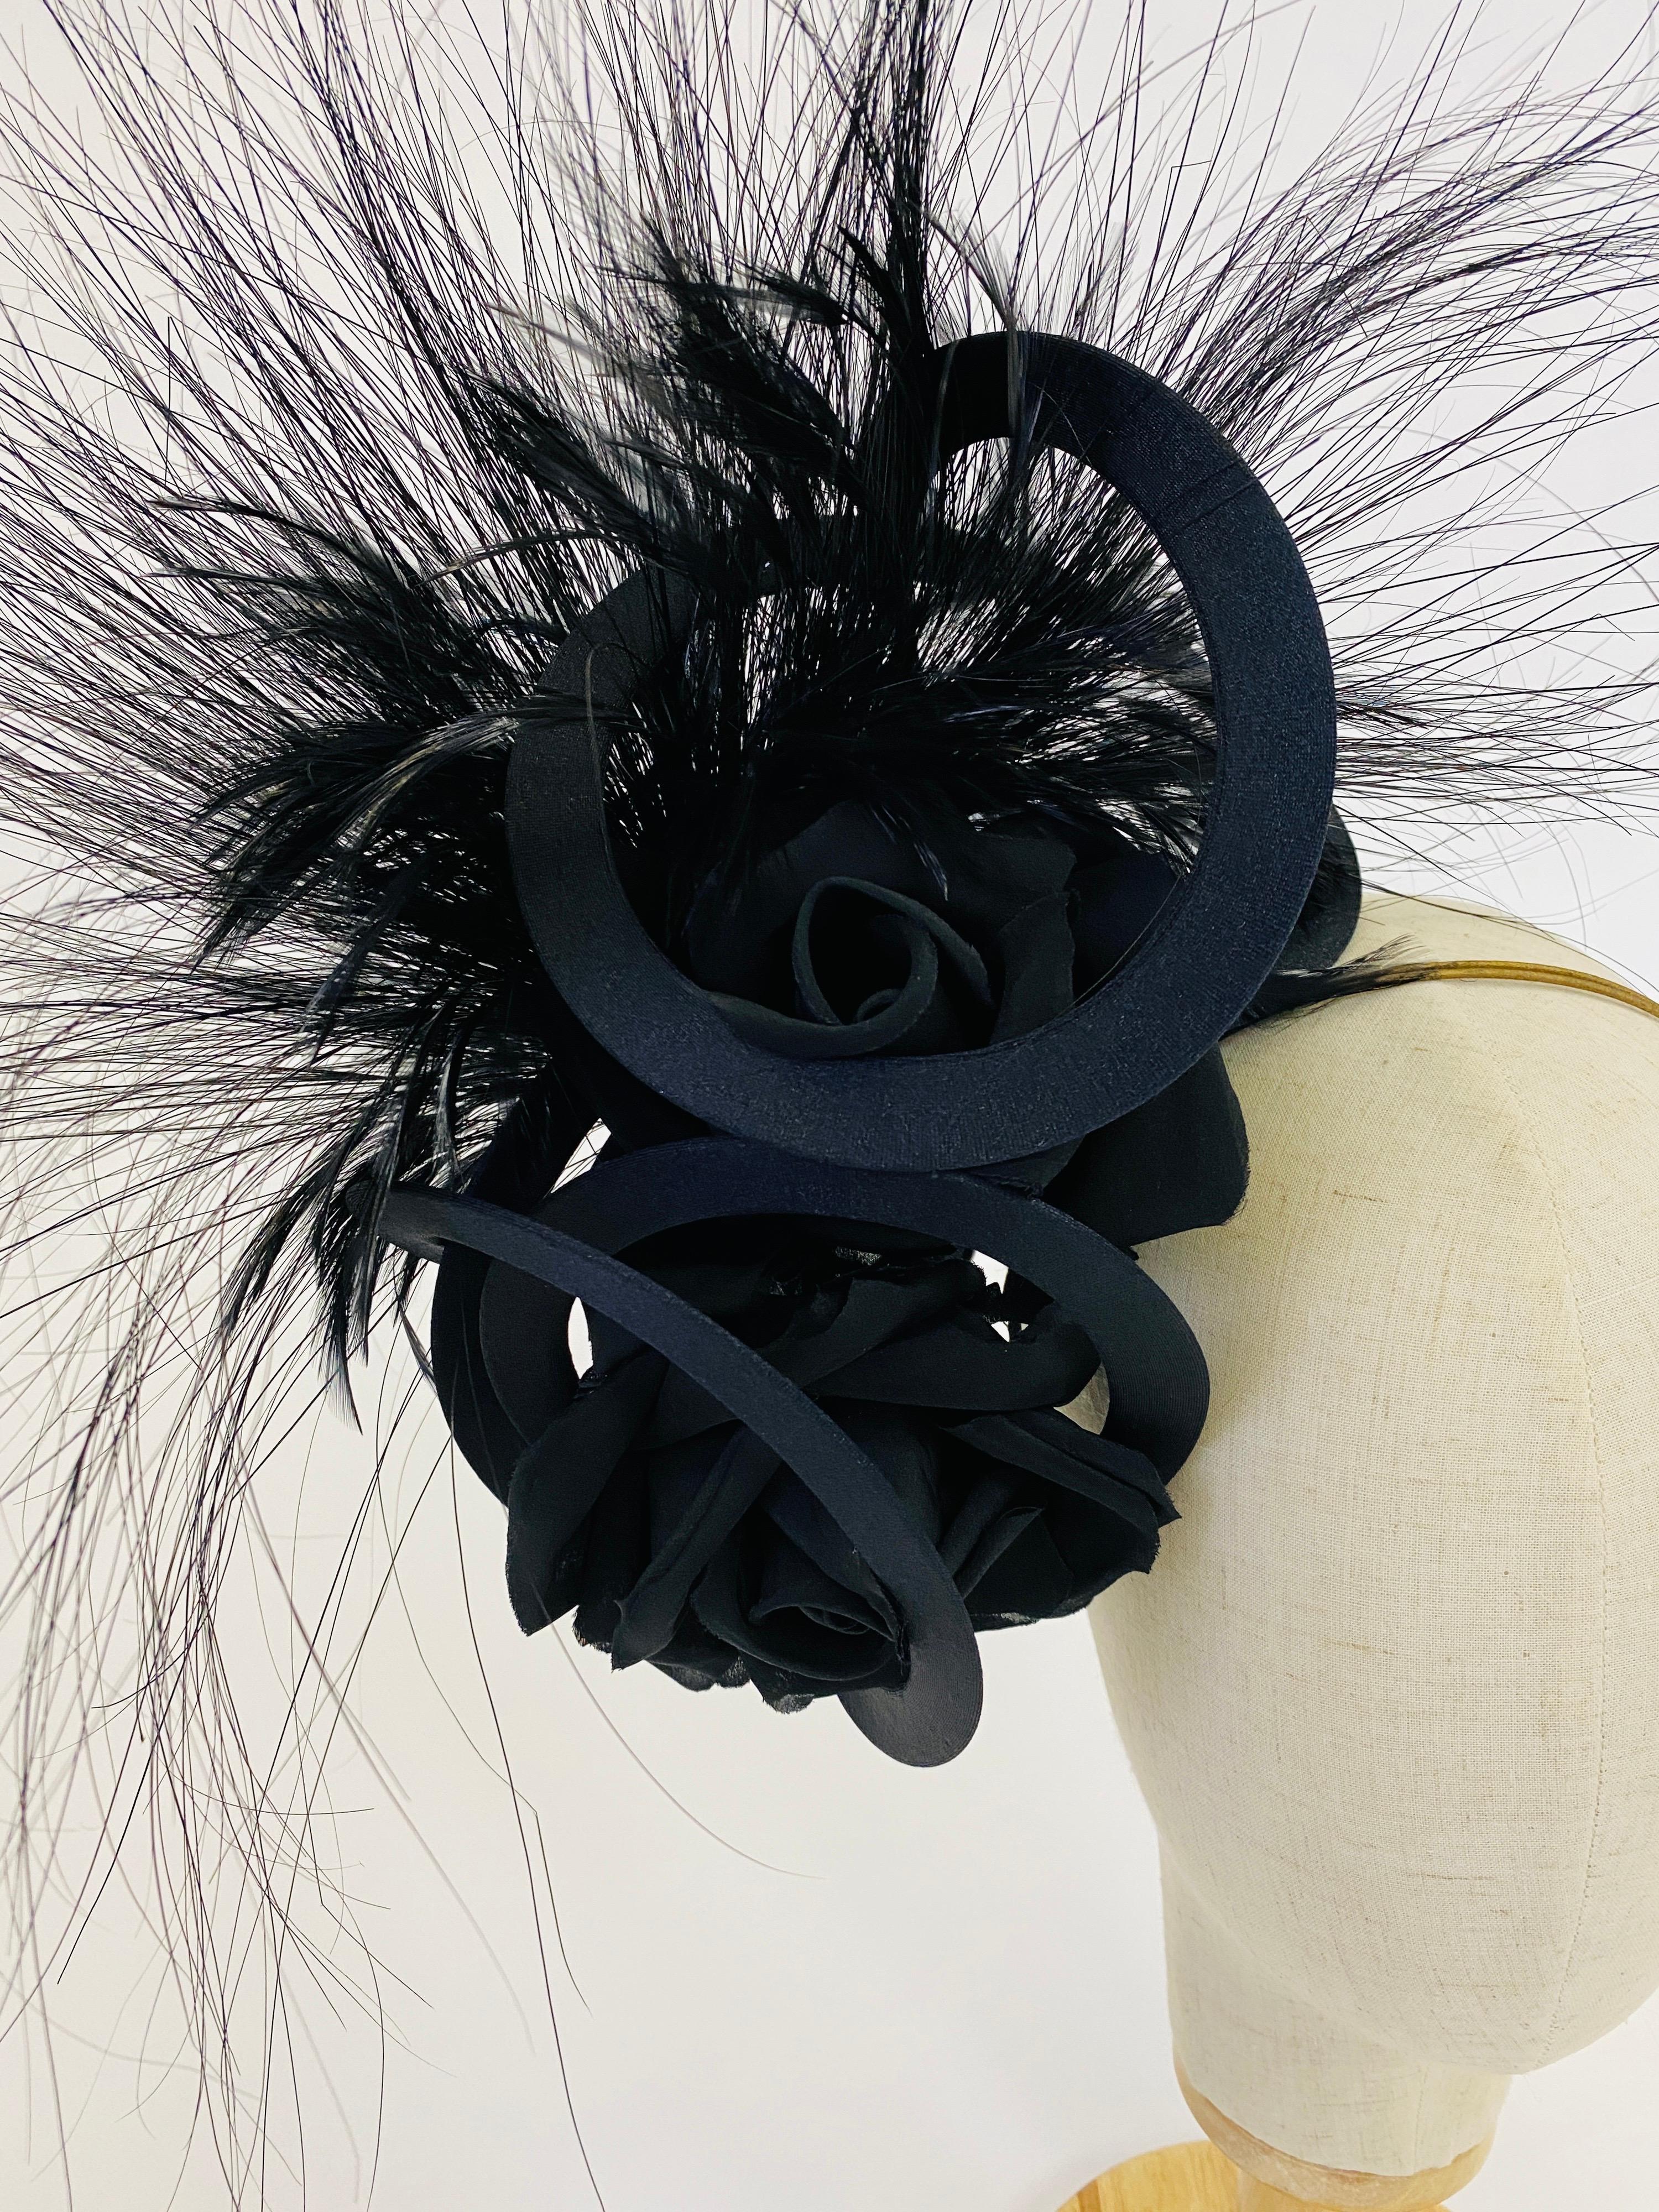 Master hat designer Philip Treacy has designed a sculptural navy fascinator with black feathers. Stunning scale and the ultimate drama abound in this design. The headpiece is attached to a wire headband that disappears into your up-do leaving only